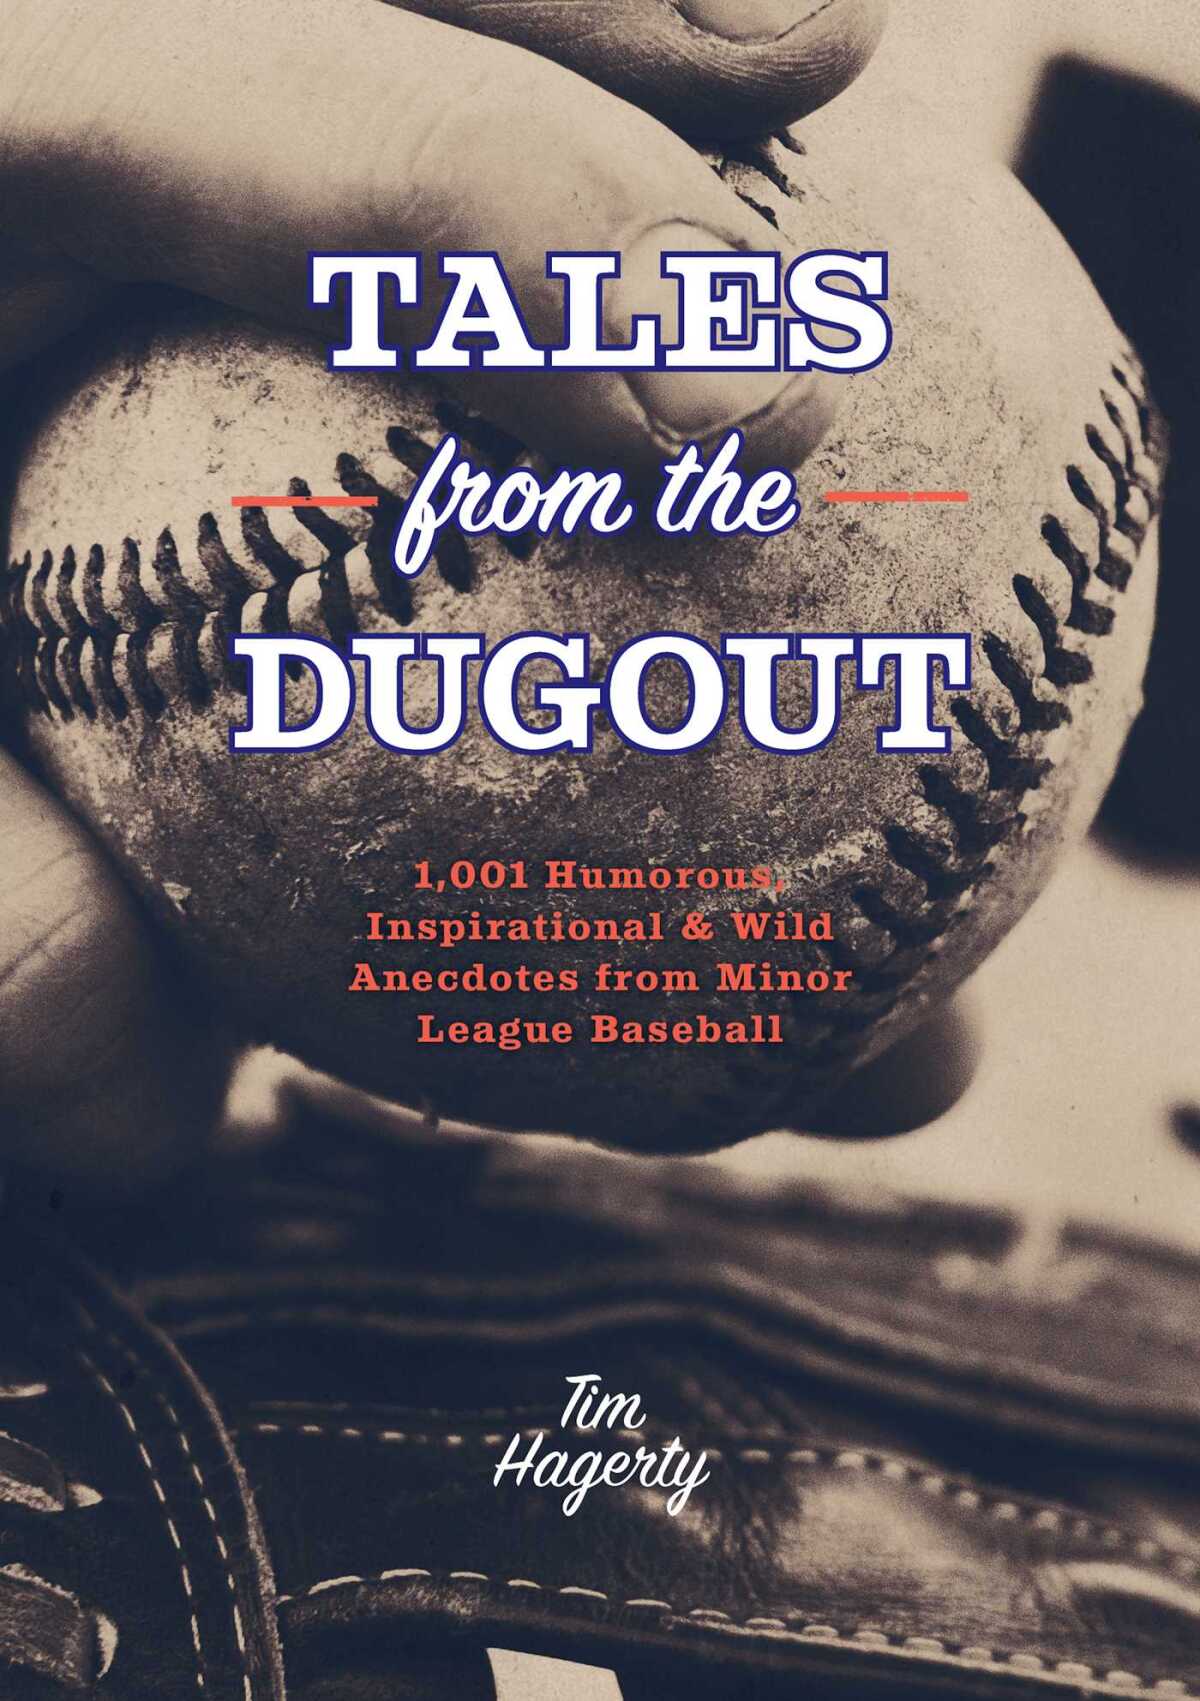 Cover "Tales from the Dugout" by Tim Hagerty